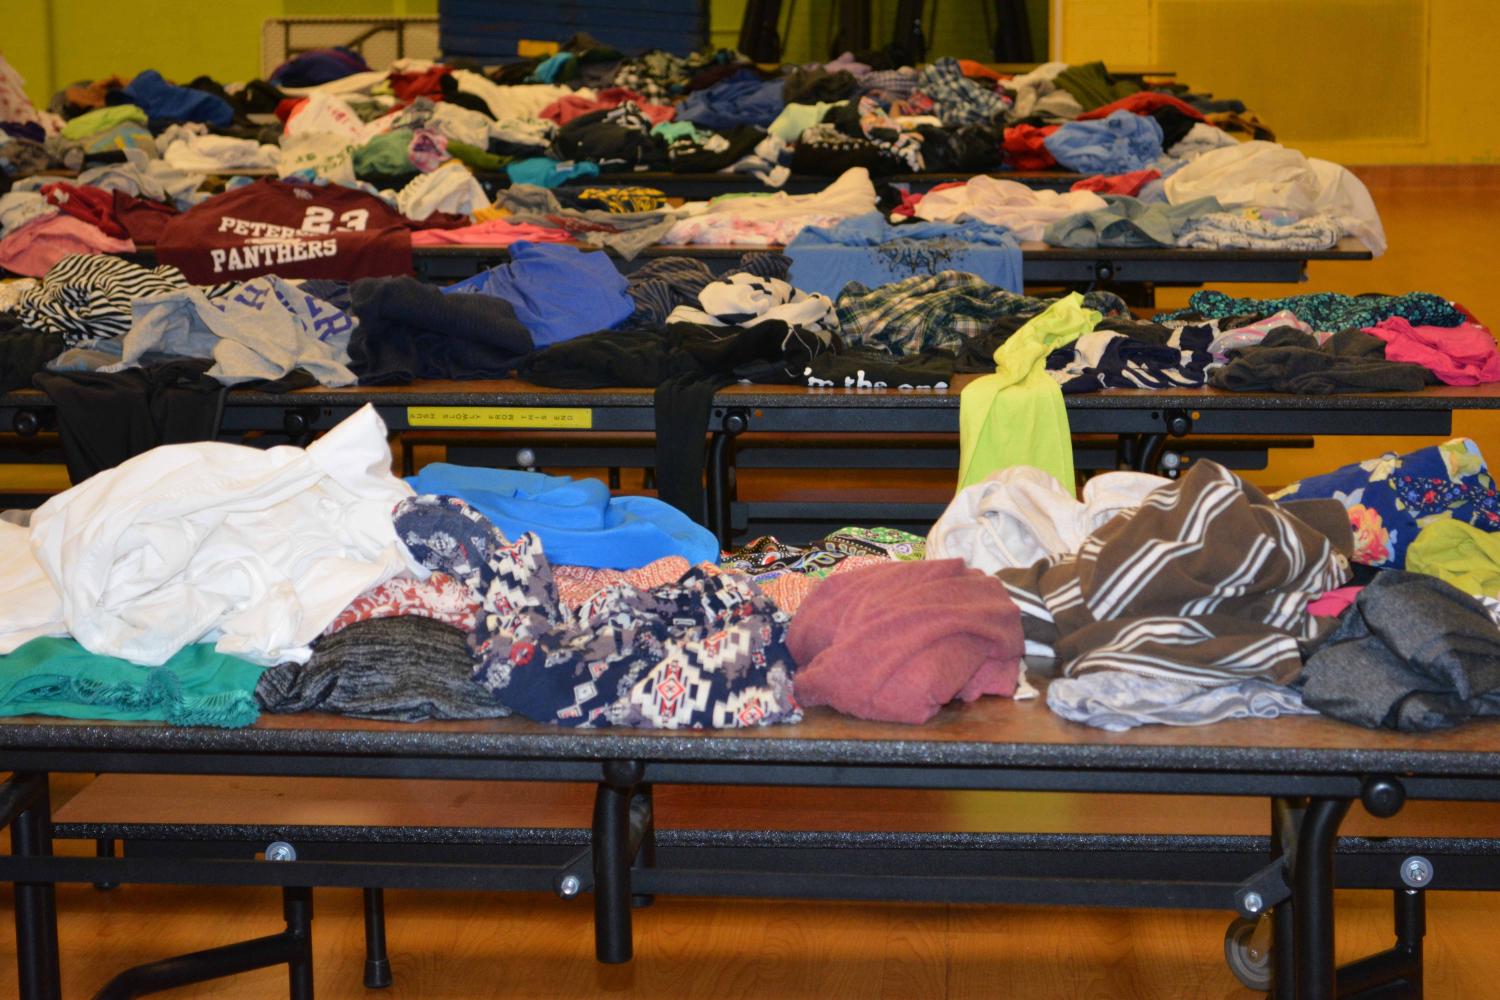 The+CPS+High+School+Student+Sustainability+Board+collected+clothes+donated+by+students+to+be+sold+in+a+%E2%80%9Cthrift+store%E2%80%9D+held+on+April+27-28+for+Earth+Week.+All+proceeds+went+to+Build-on.